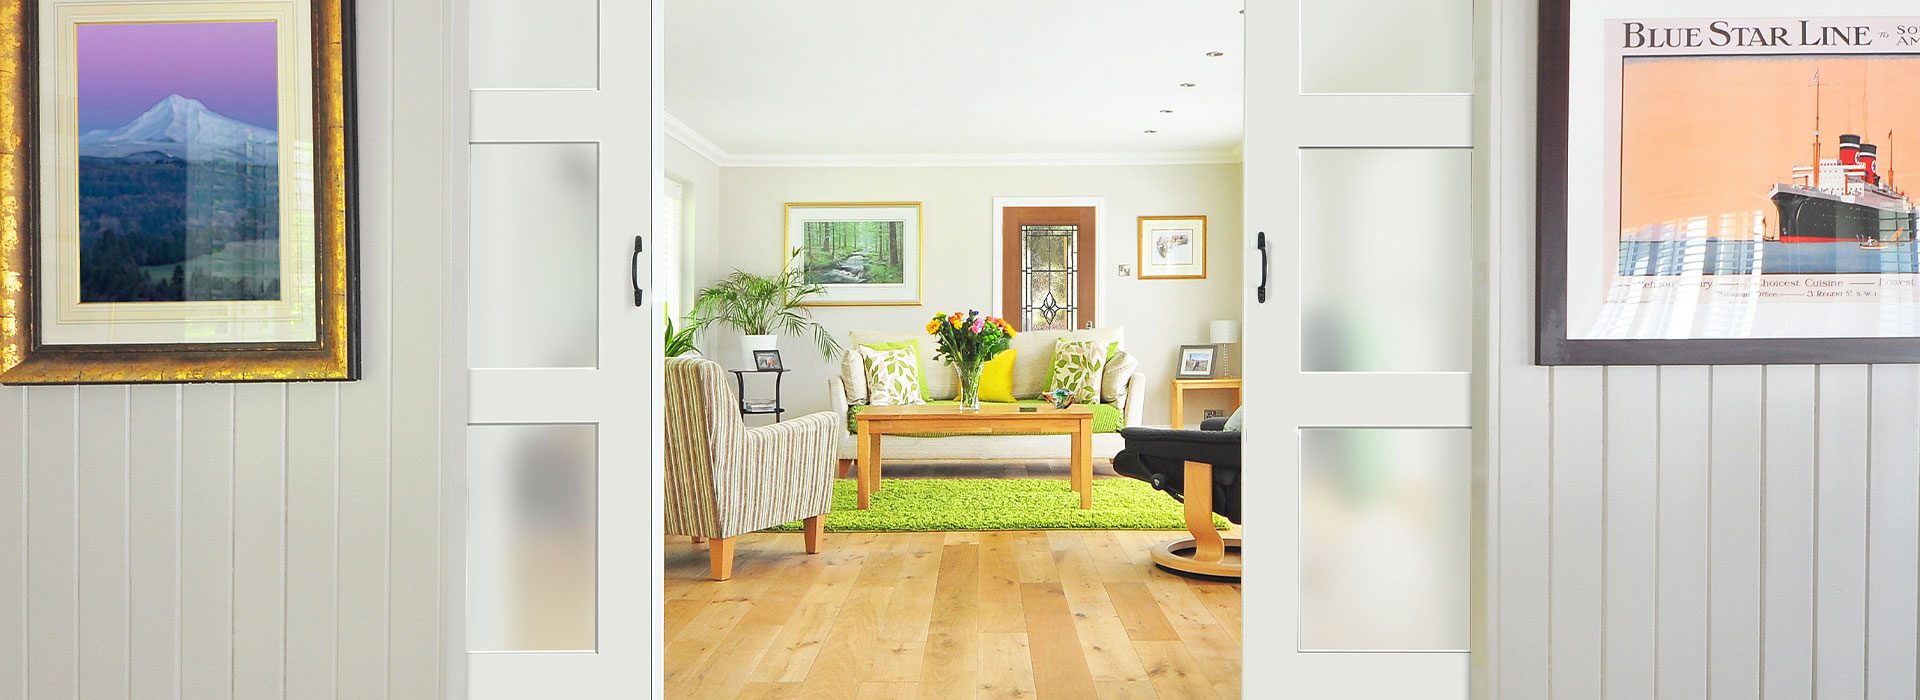 Sliding double doors entryway view of a Modern Cottage style living room with 3 sofas around a green shag rug under a wooden rectangle coffee table in the center of the room